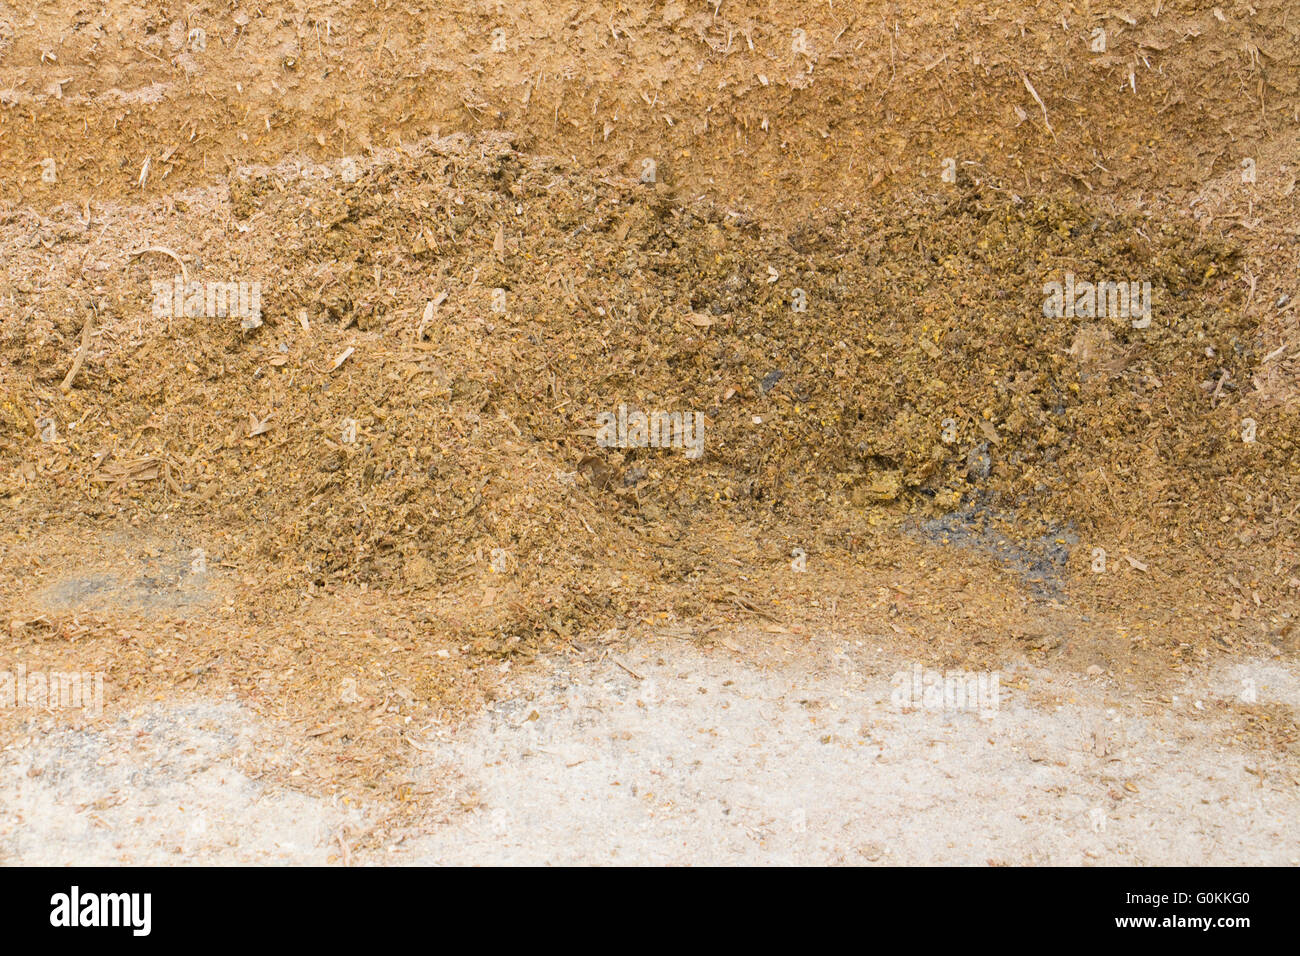 Mouldy maize silage at the base of a maize silage bunker on a dairy farm in Northern Italy Stock Photo